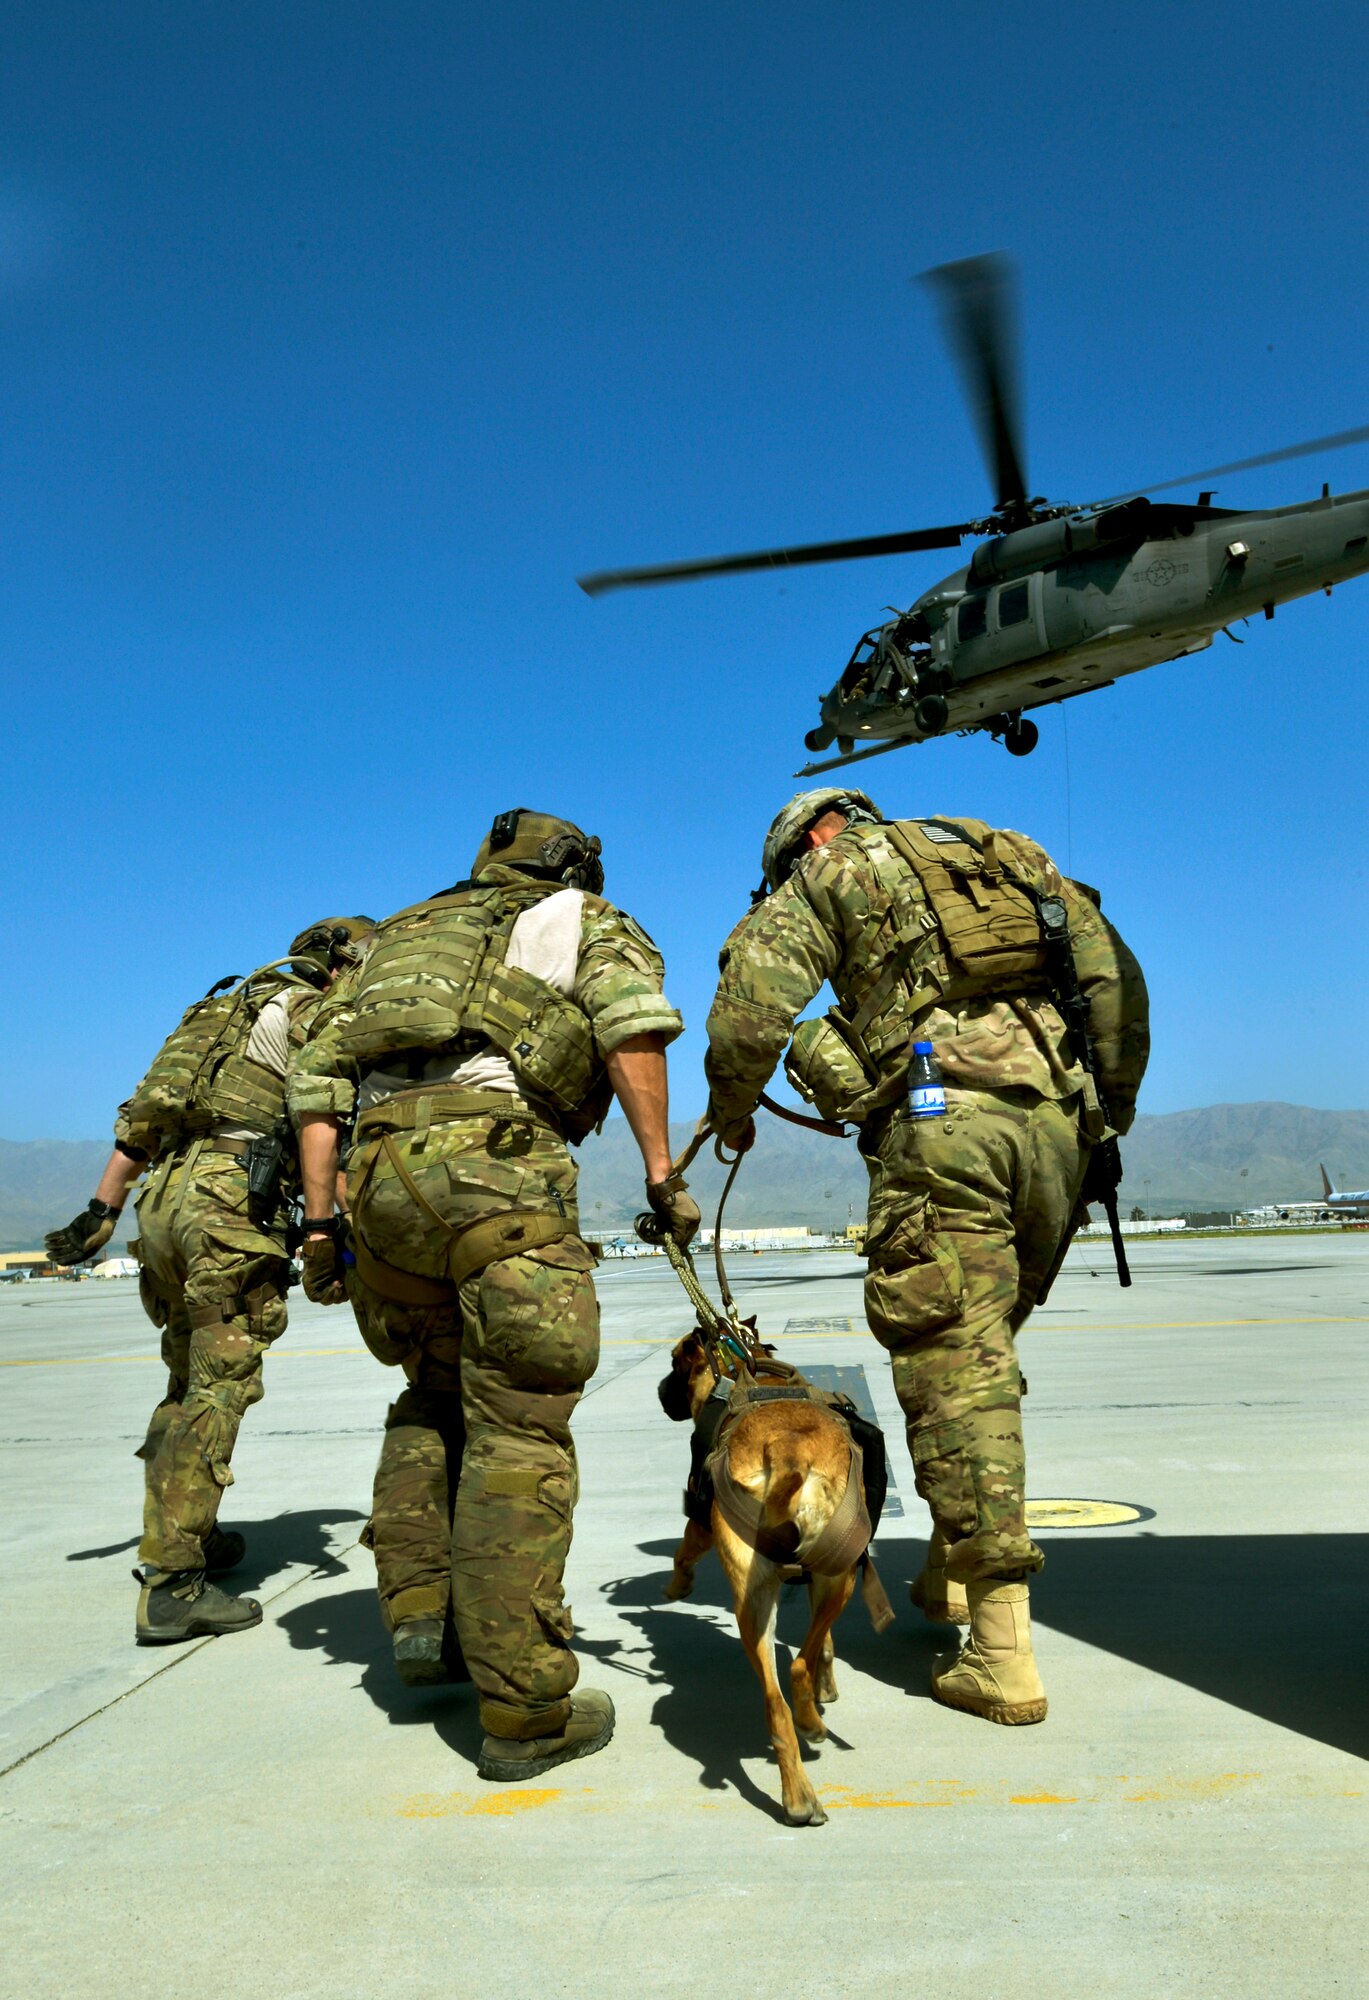 U.S. Army tactical explosive detection dogs and their handlers take turns getting hoist into a HH-60G Pave Hawk helicopter by 83rd Expeditionary Rescue Squadron pararescueman during joint training at Bagram Airfield, Afghanistan, June 21.  The TED dogs are trained to find IED’s outside the base. The chances of them needing rescued are high here making this training important for both branches. (U.S. Air Force photo/ Staff Sgt. Stephenie Wade)